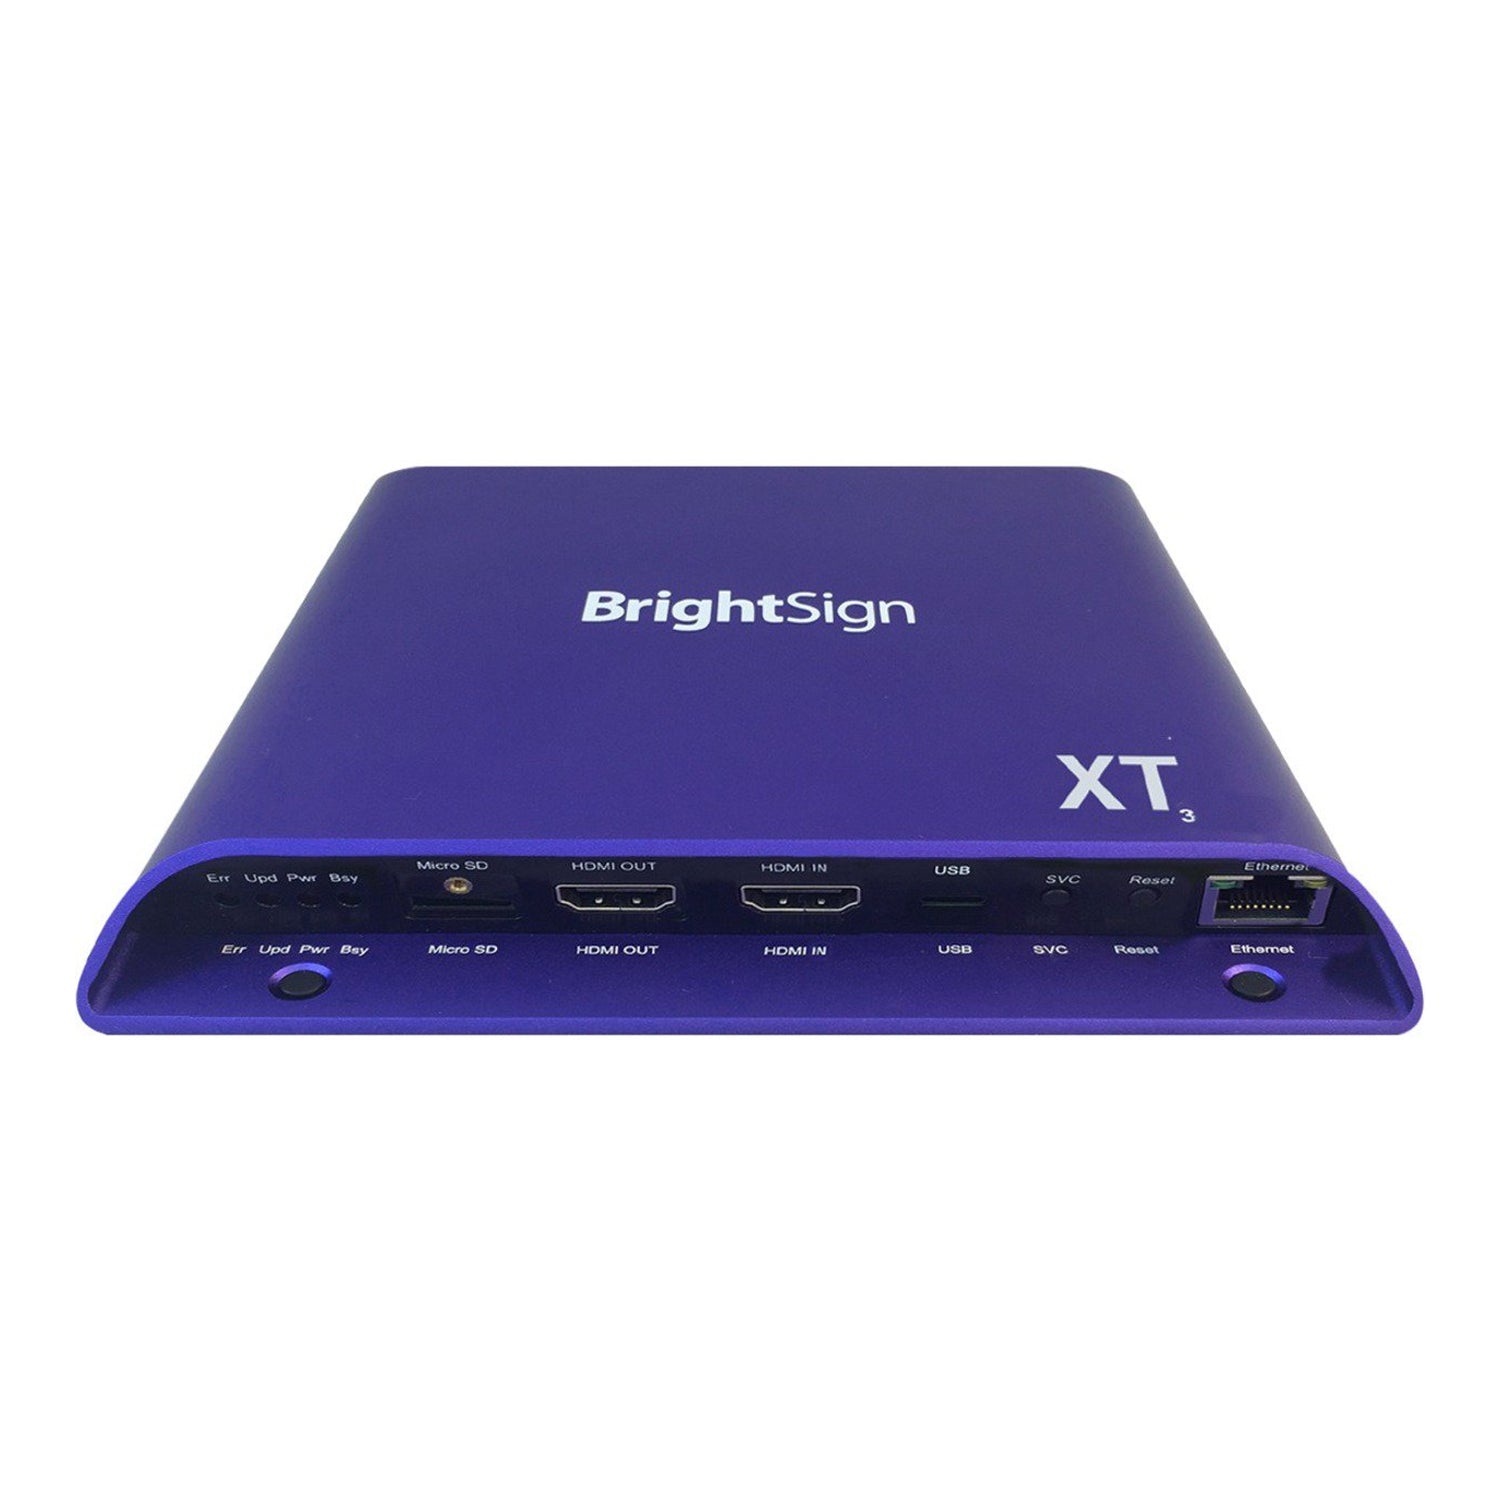 BrightSign XT1143 Expanded I/O Player